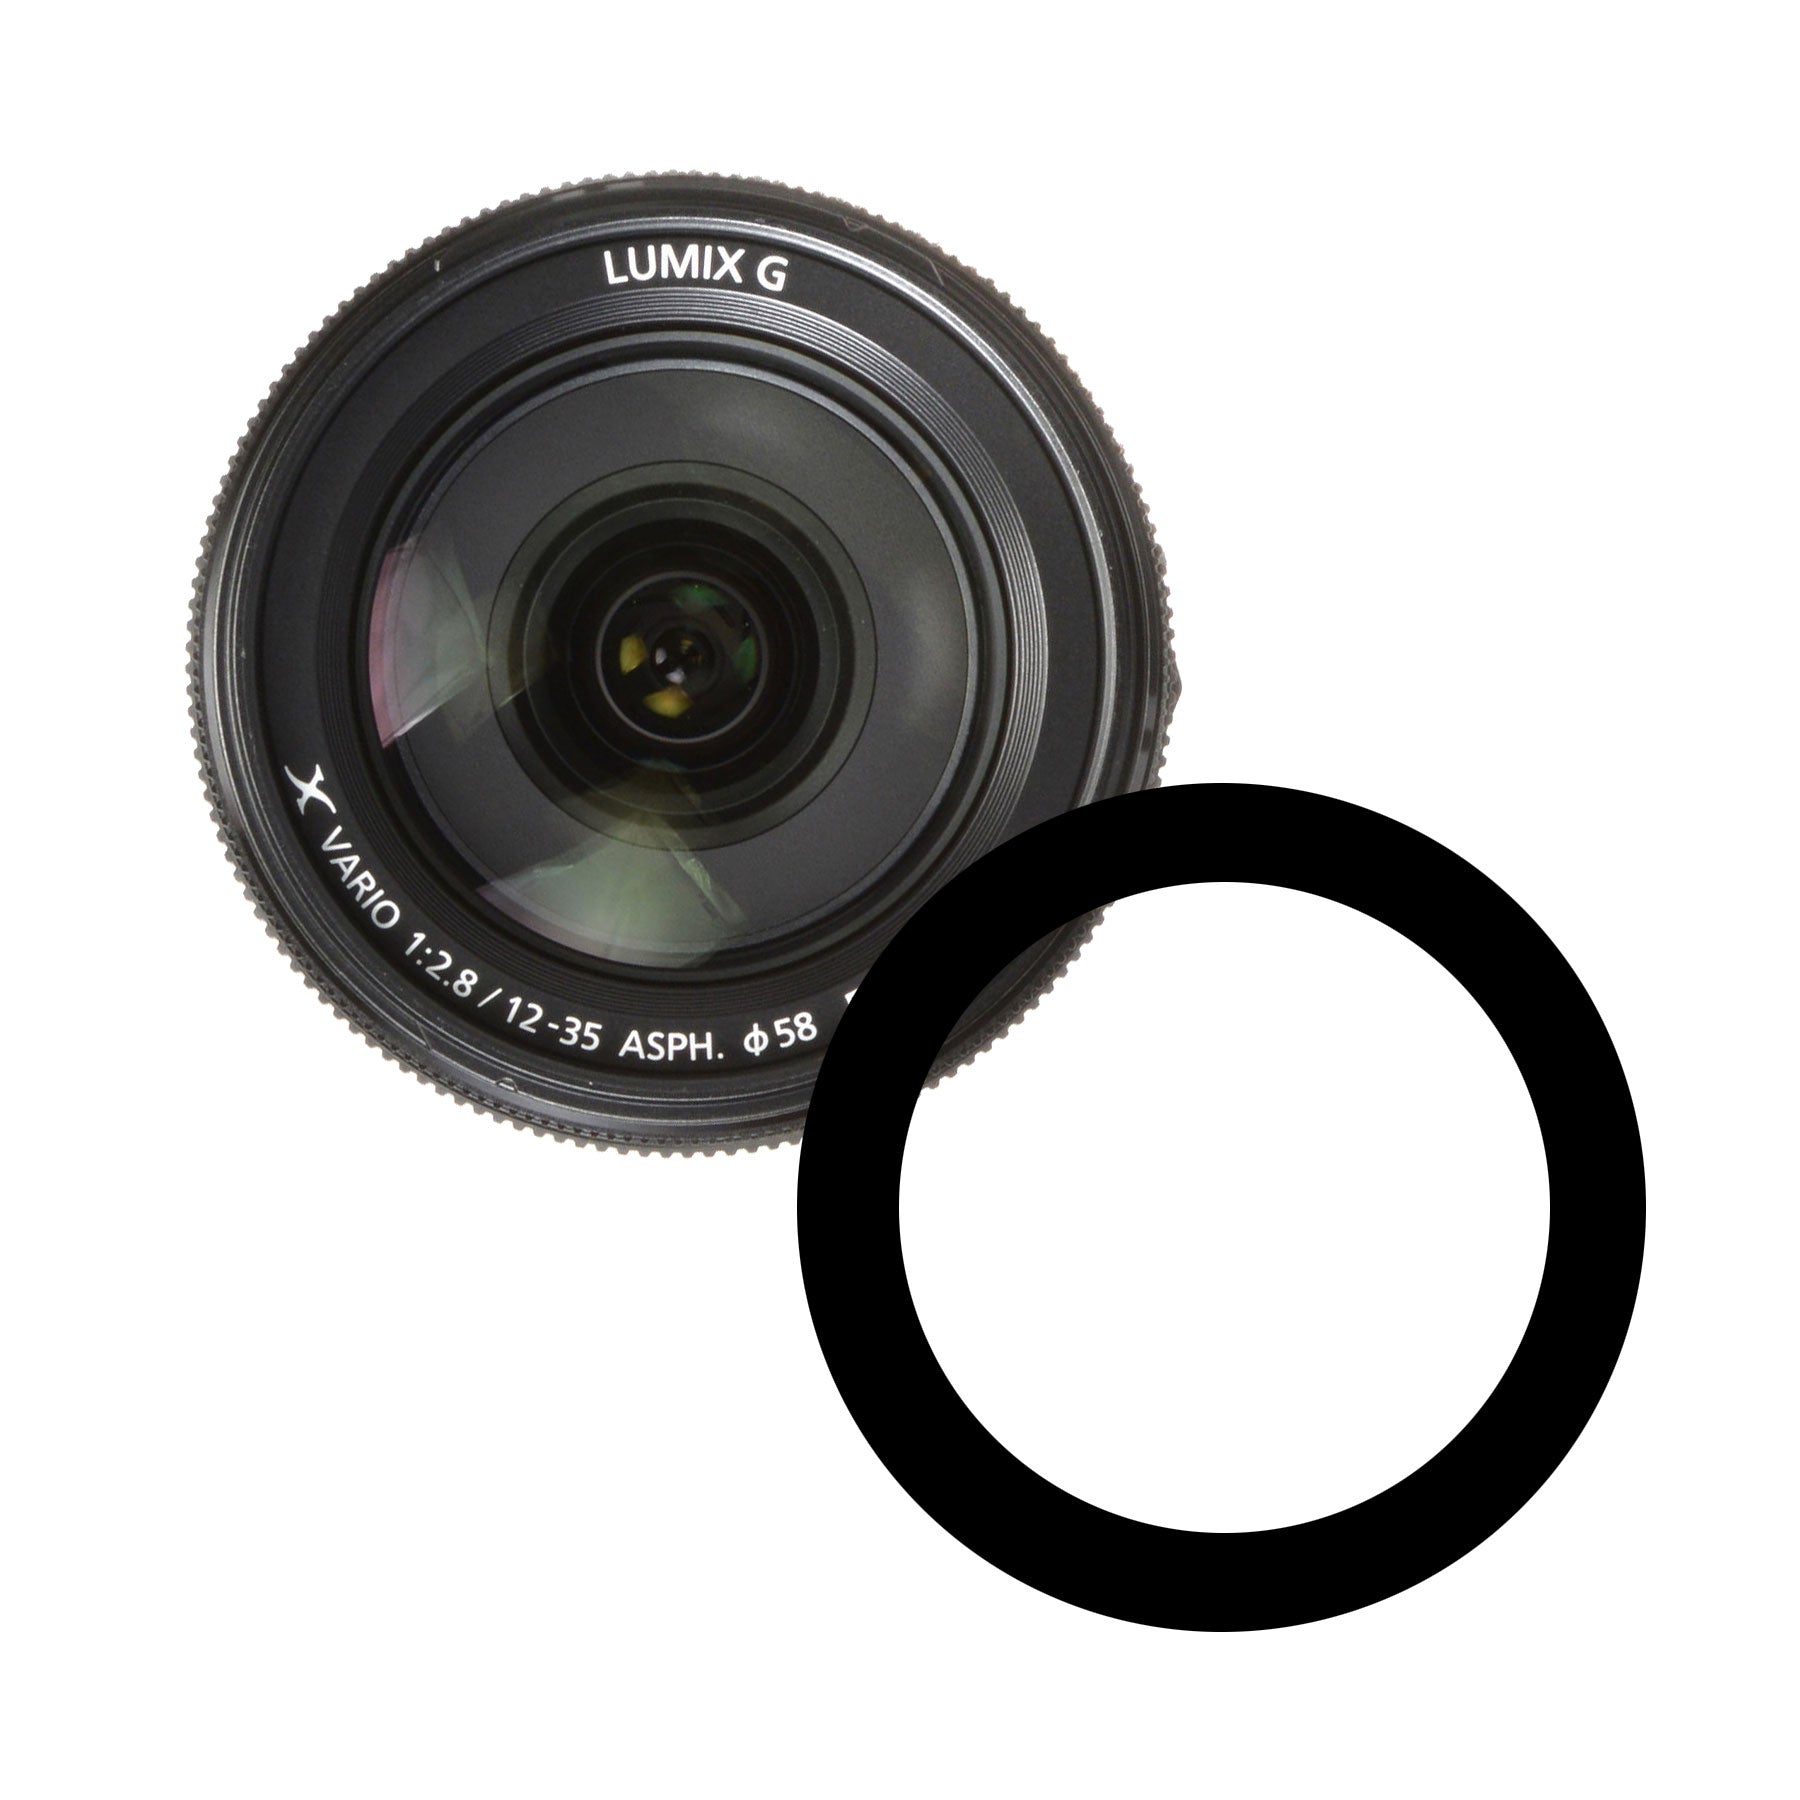 Anti-Reflection Ring for Panasonic 12-35mm F2.8 I or II ASPH Power OIS Lens